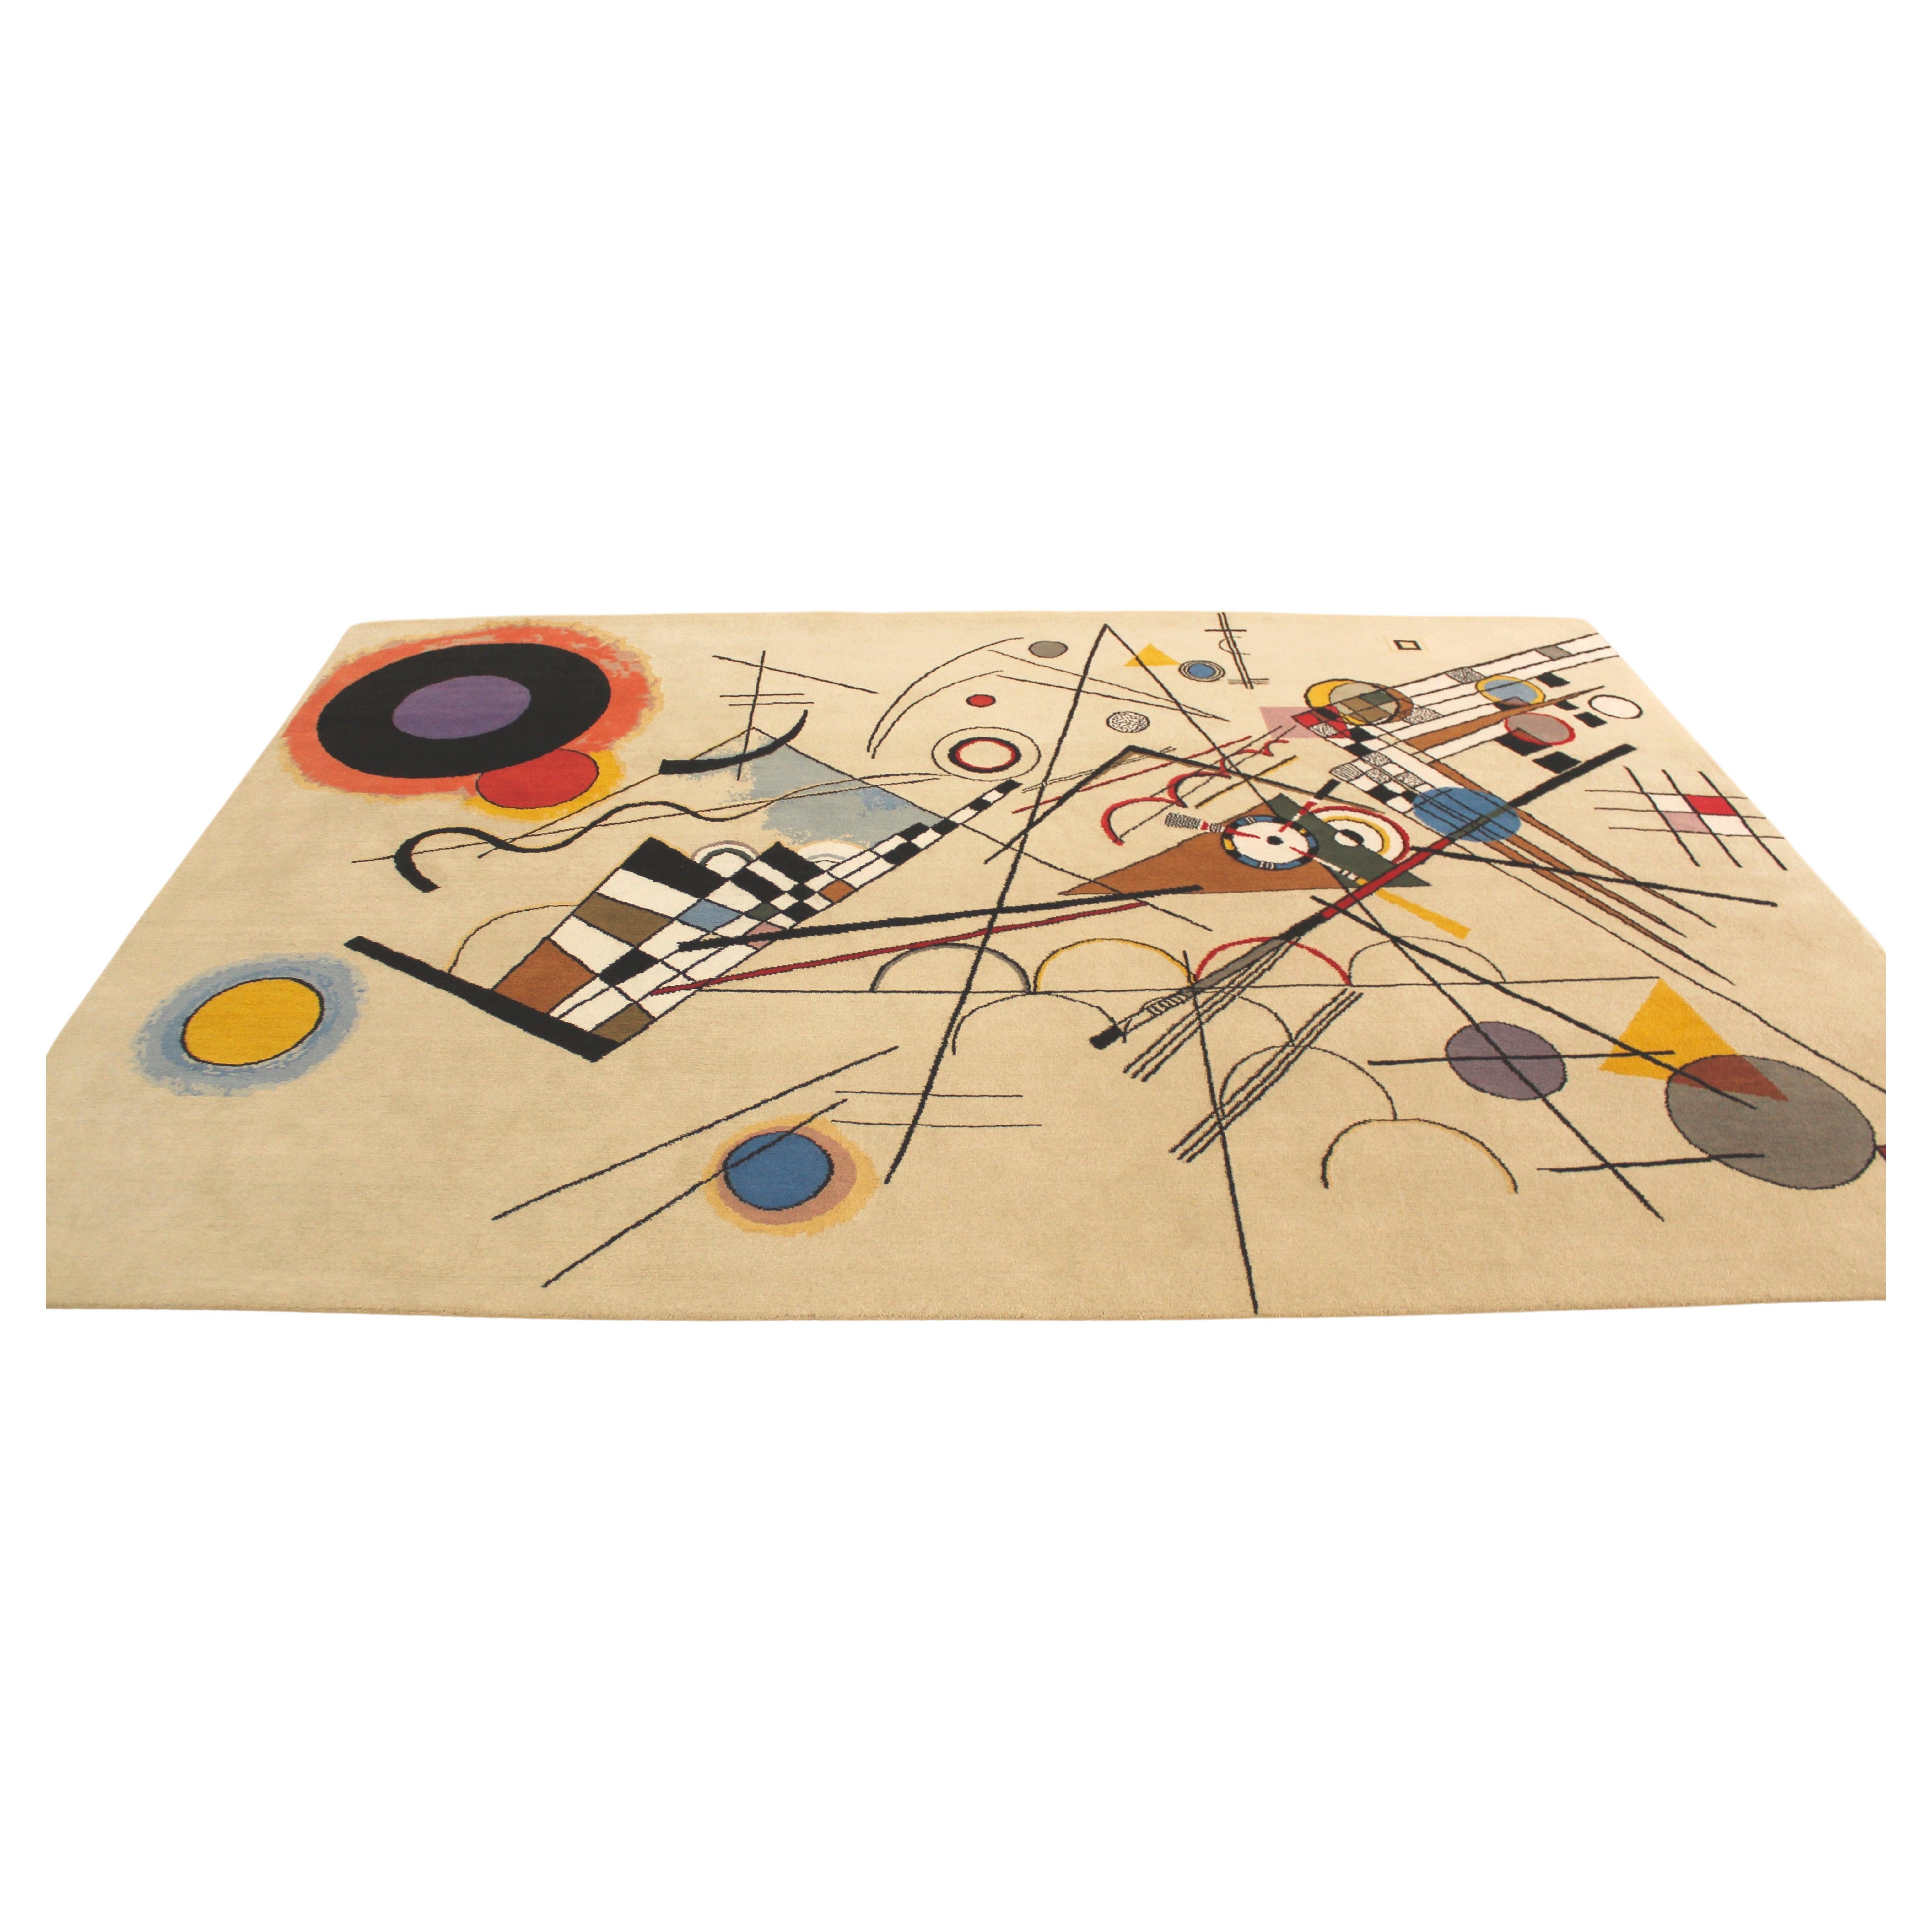 Custom Hand knotted Rug, after Wassily Kandinsky “Composition VIII”. Wool, silk For Sale 1